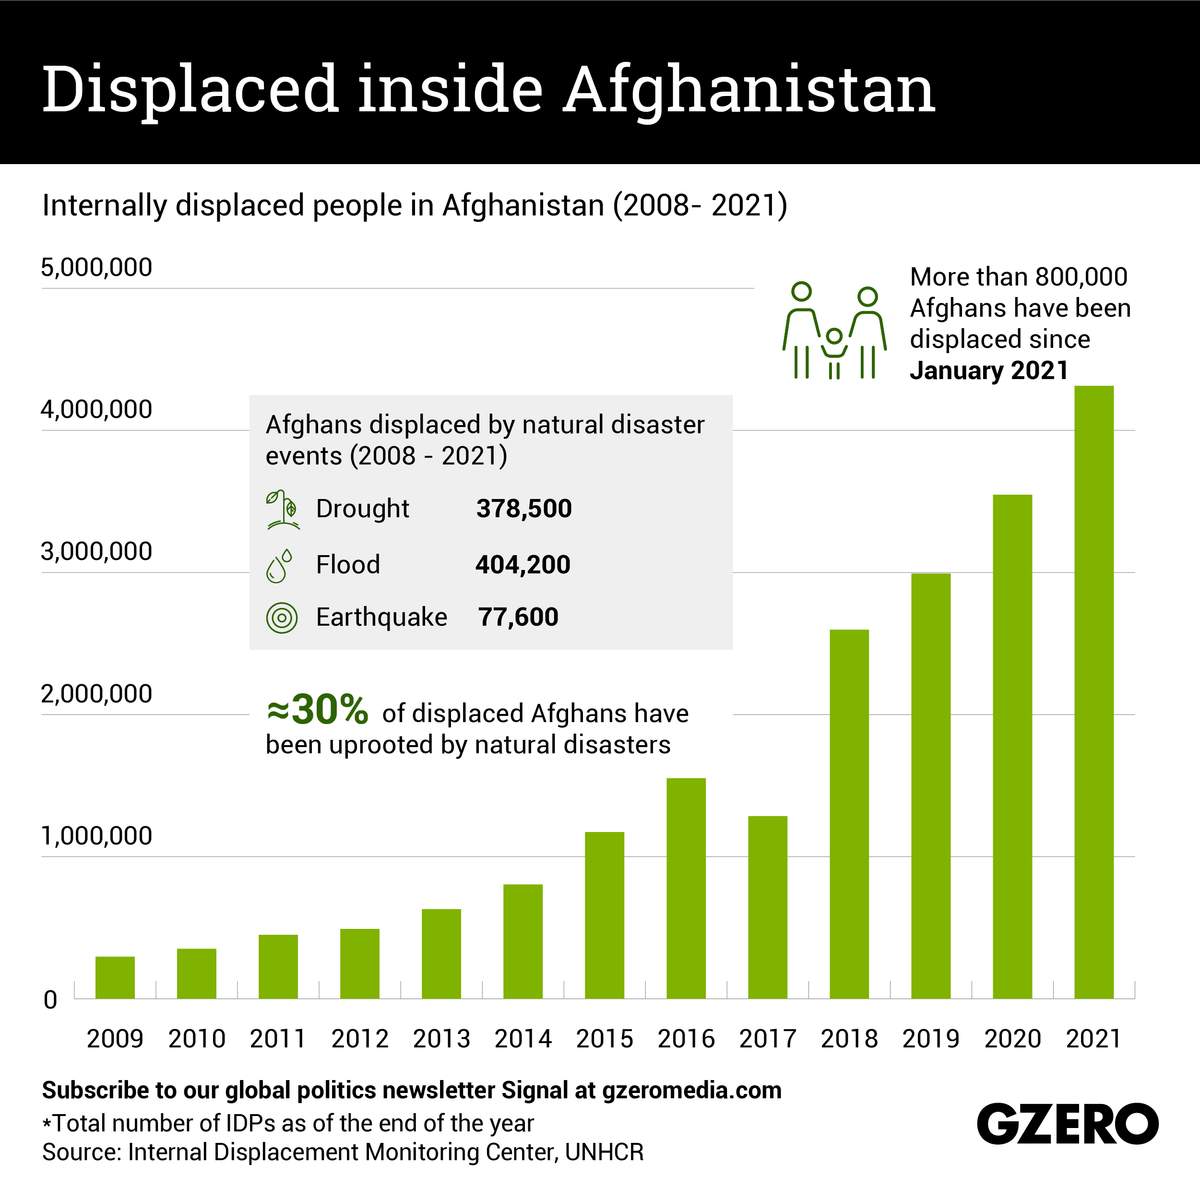 The Graphic Truth: Displaced inside Afghanistan